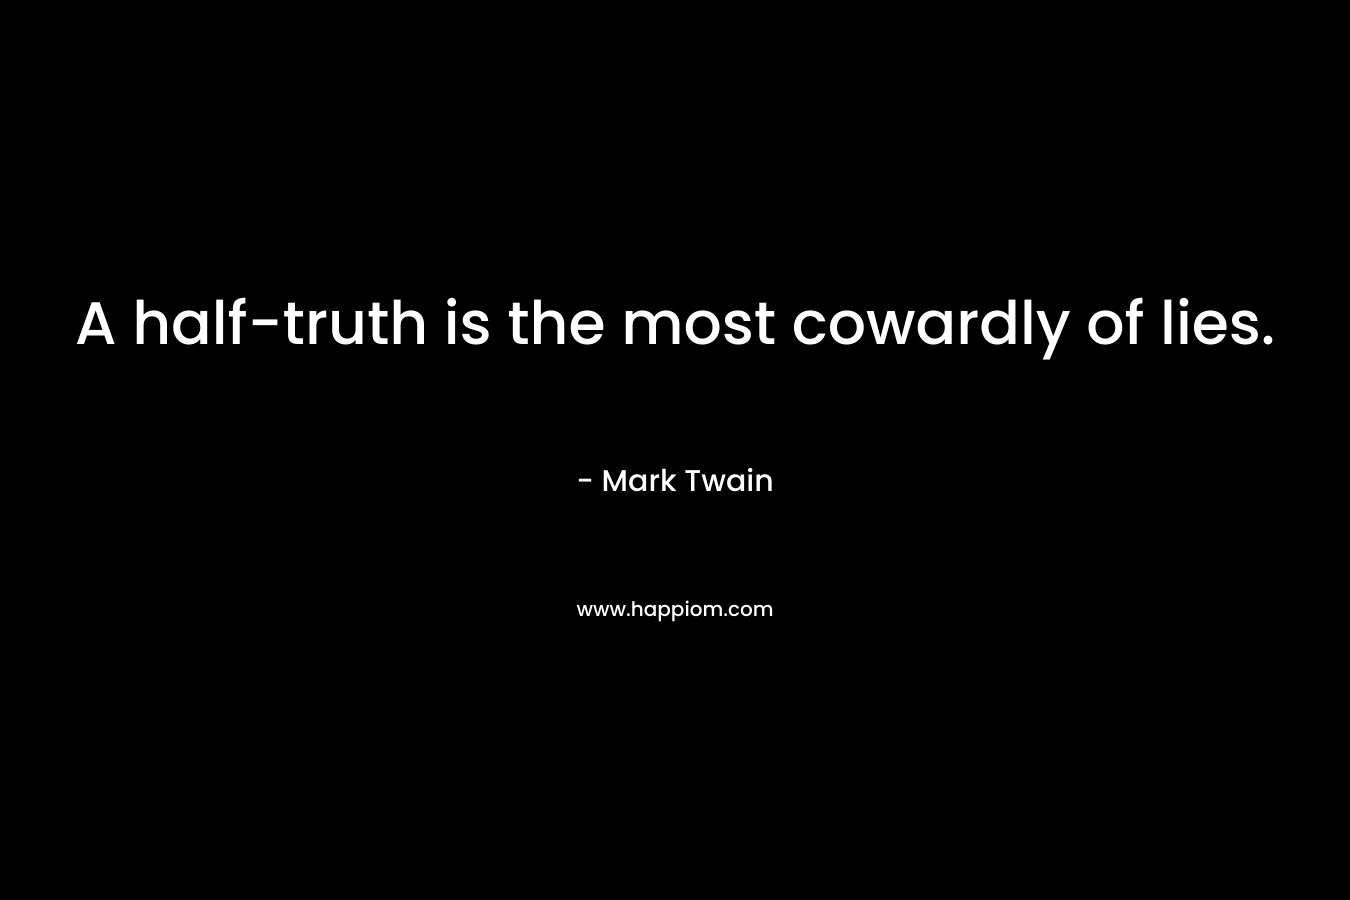 A half-truth is the most cowardly of lies.